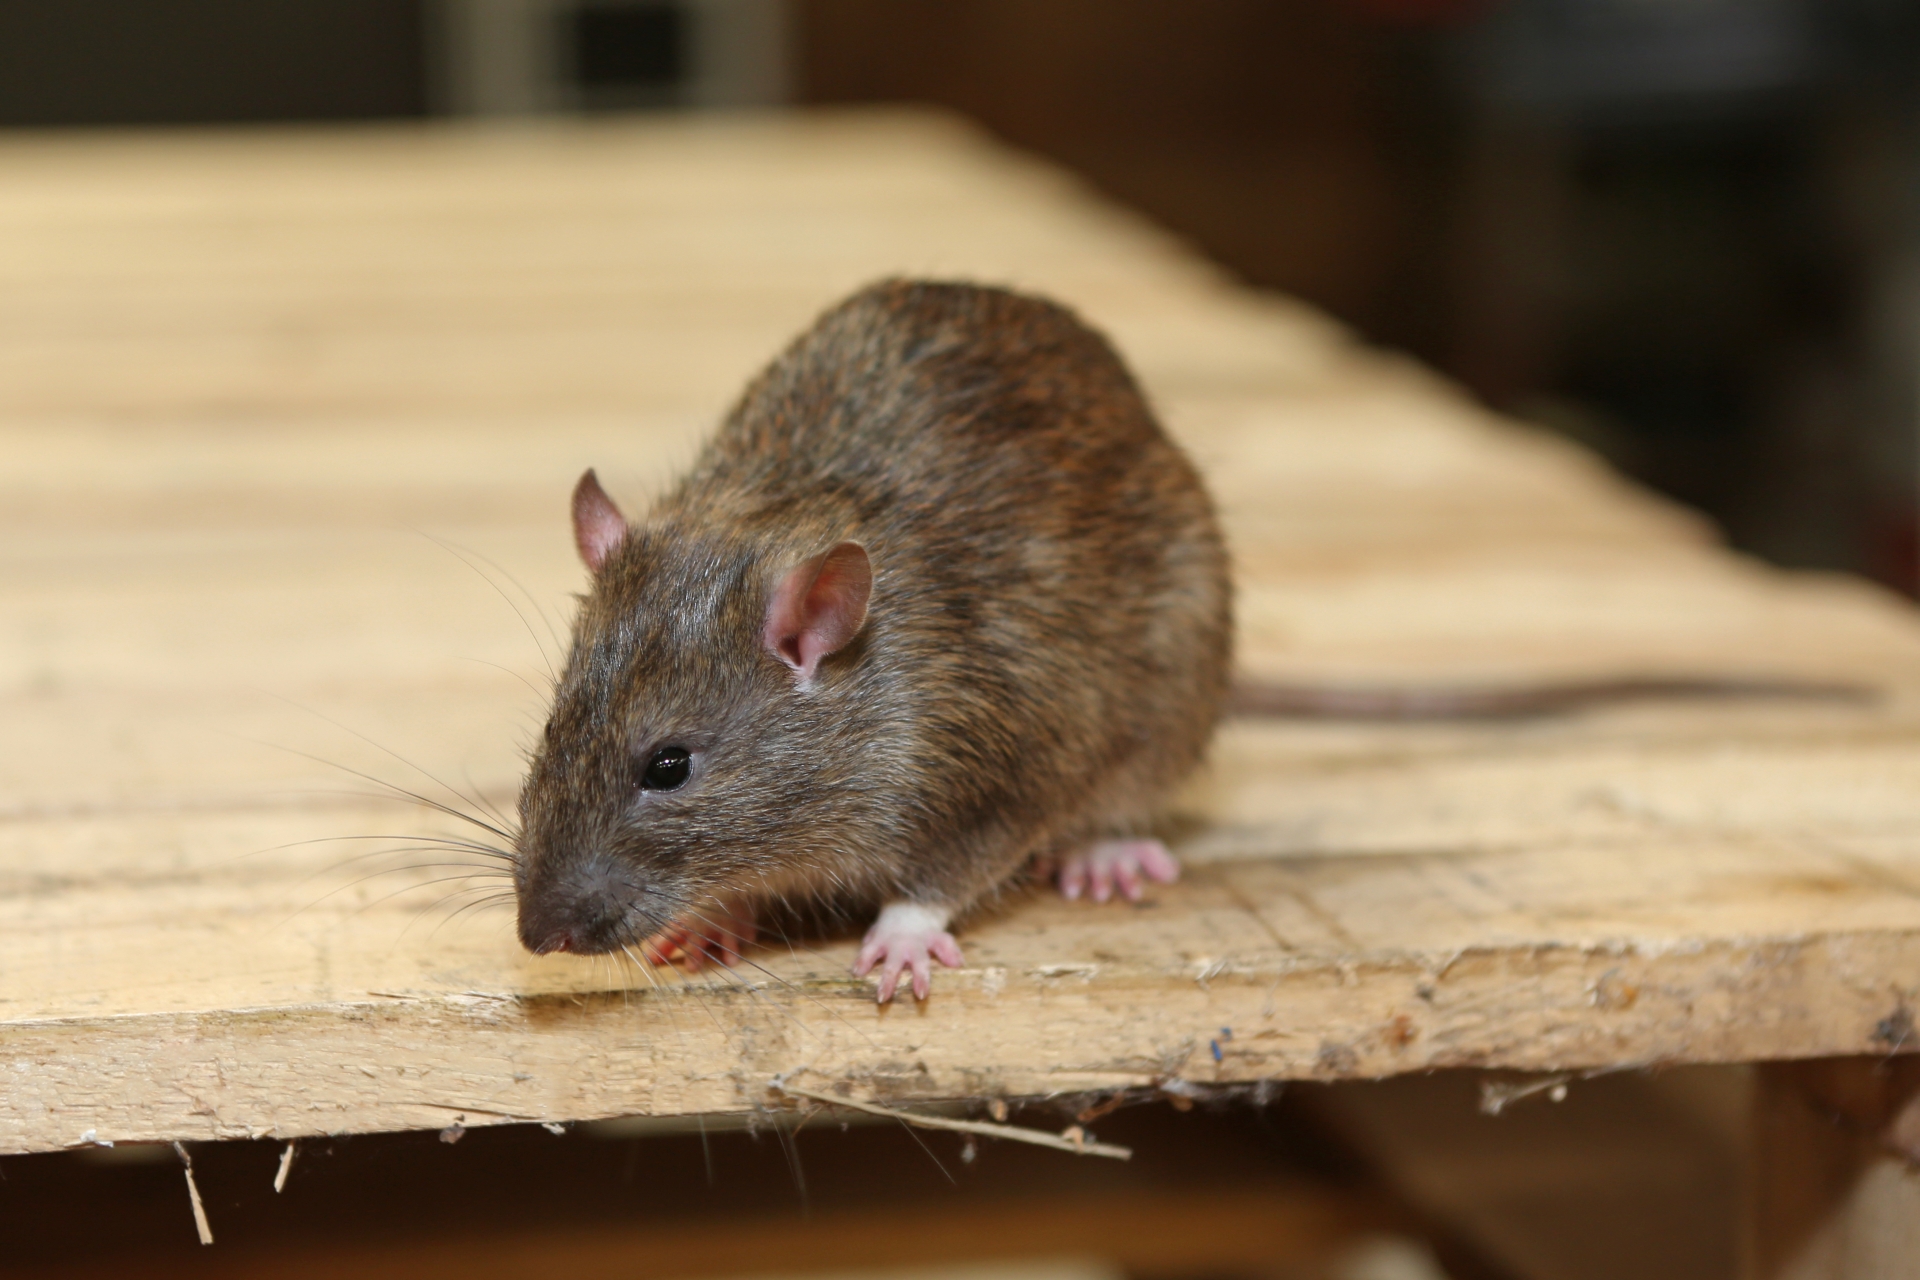 Rat Control, Pest Control in Tulse Hill, West Norwood, SE27. Call Now 020 8166 9746